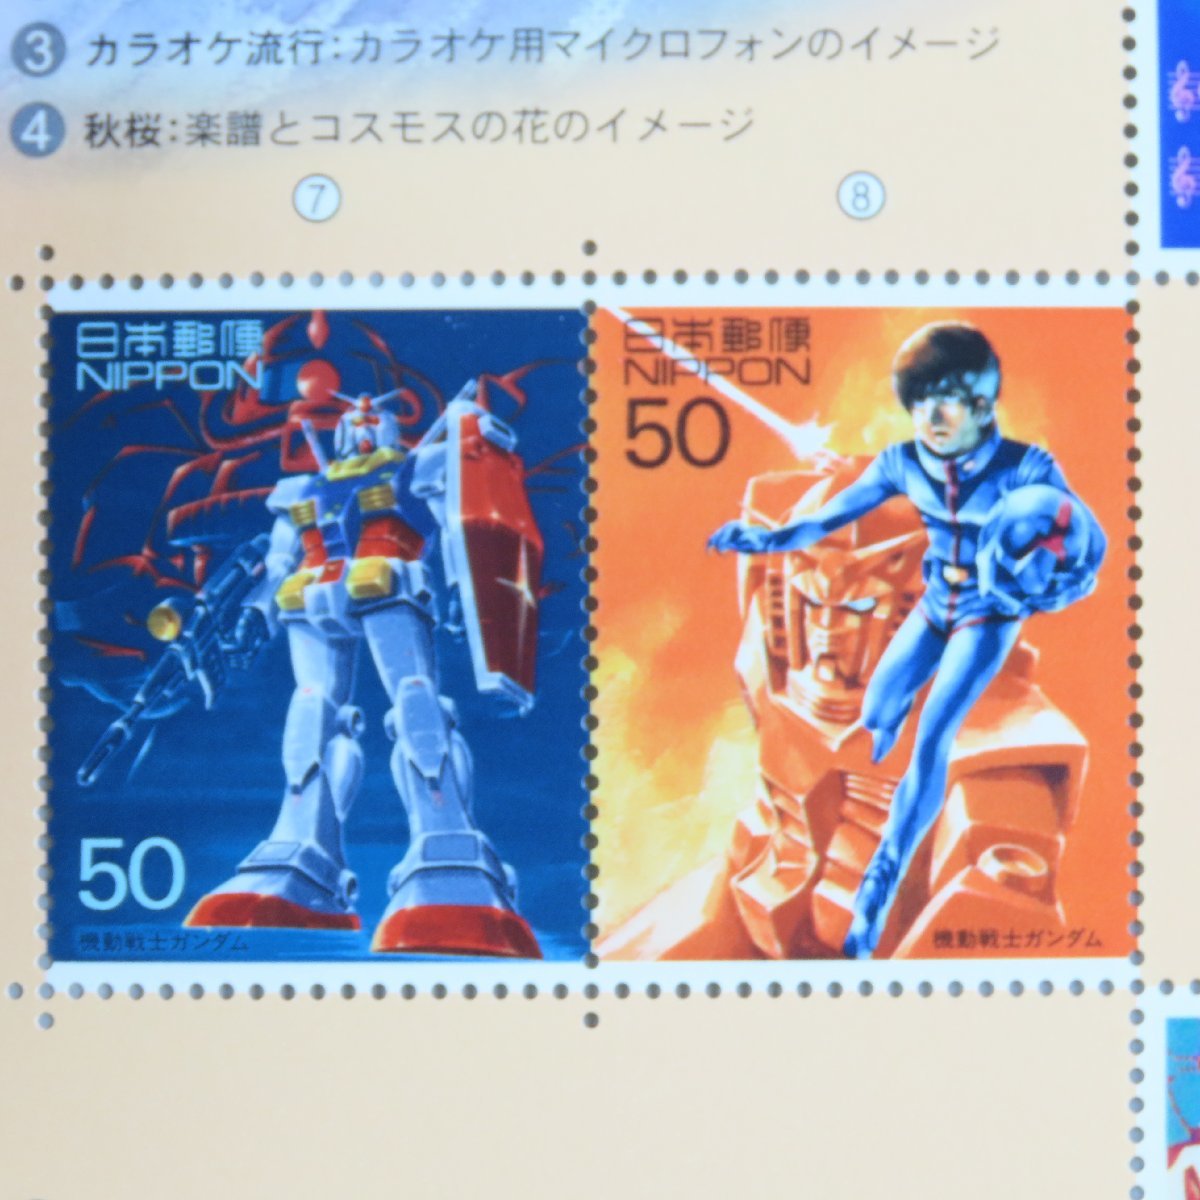 [ stamp 2287]20 century design stamp no. 15 compilation [ era ] from Mobile Suit Gundam 80 jpy /50 jpy 10 surface 1 seat postal . instructions manual pamphlet attaching 